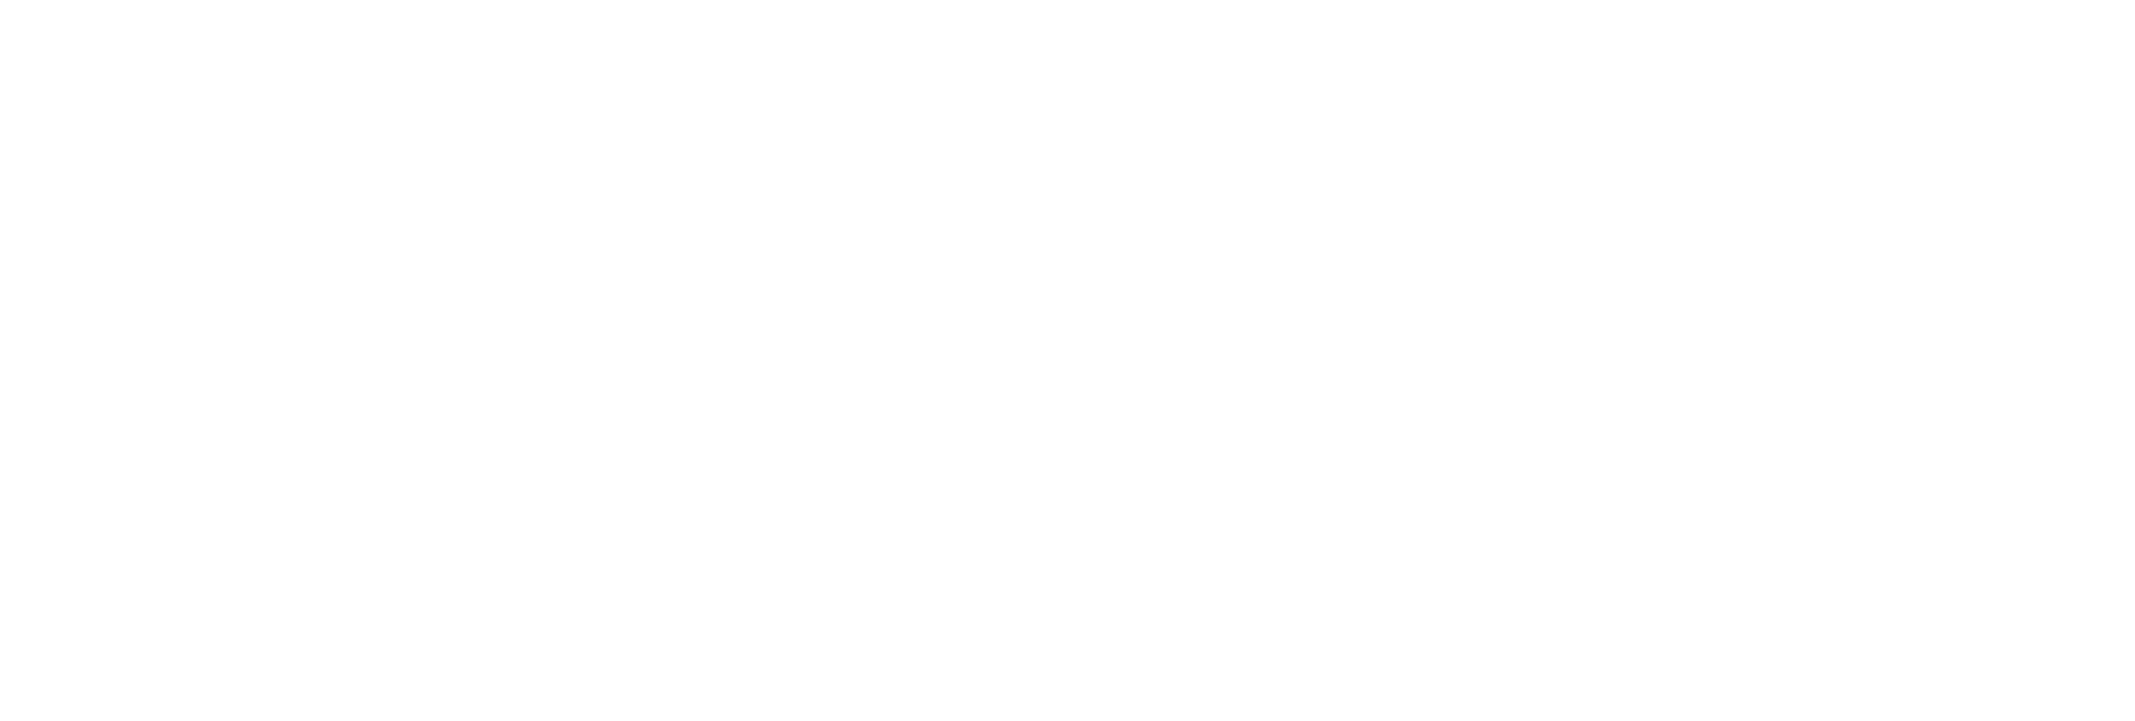 Reimaging Workplaces in Indiana Logo.